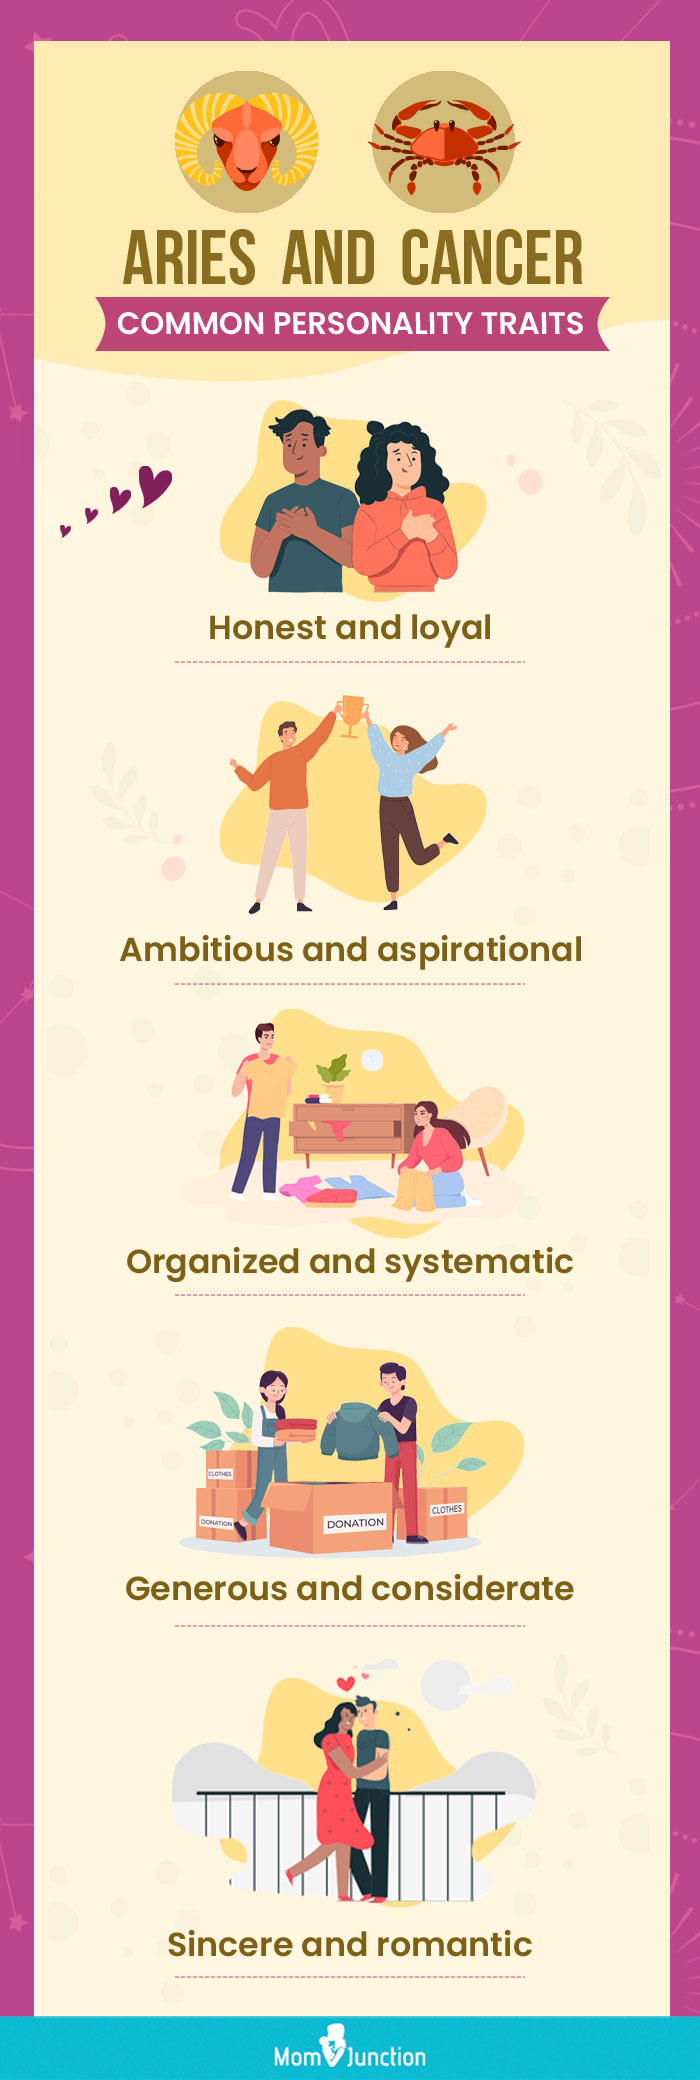 aries and cancer common personality (infographic)